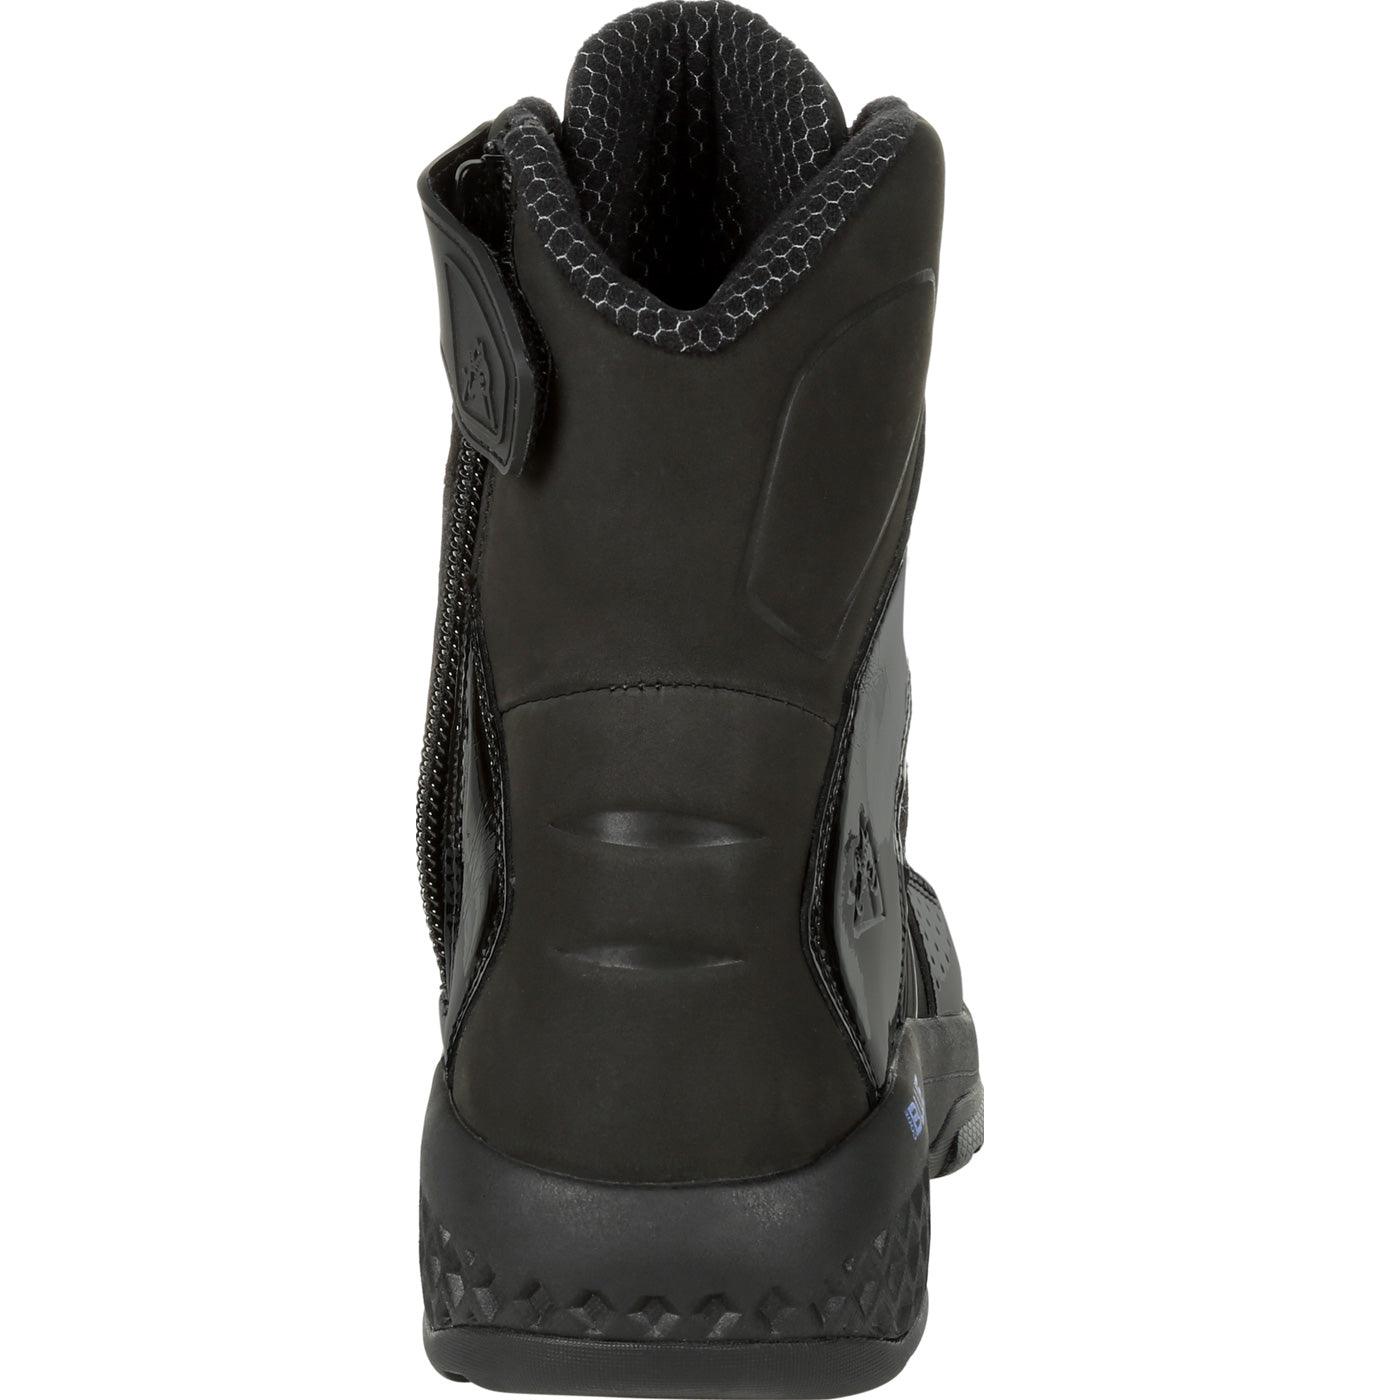 Rocky Code Blue 8" Public Service Boot - Web Exclusive - Flyclothing LLC